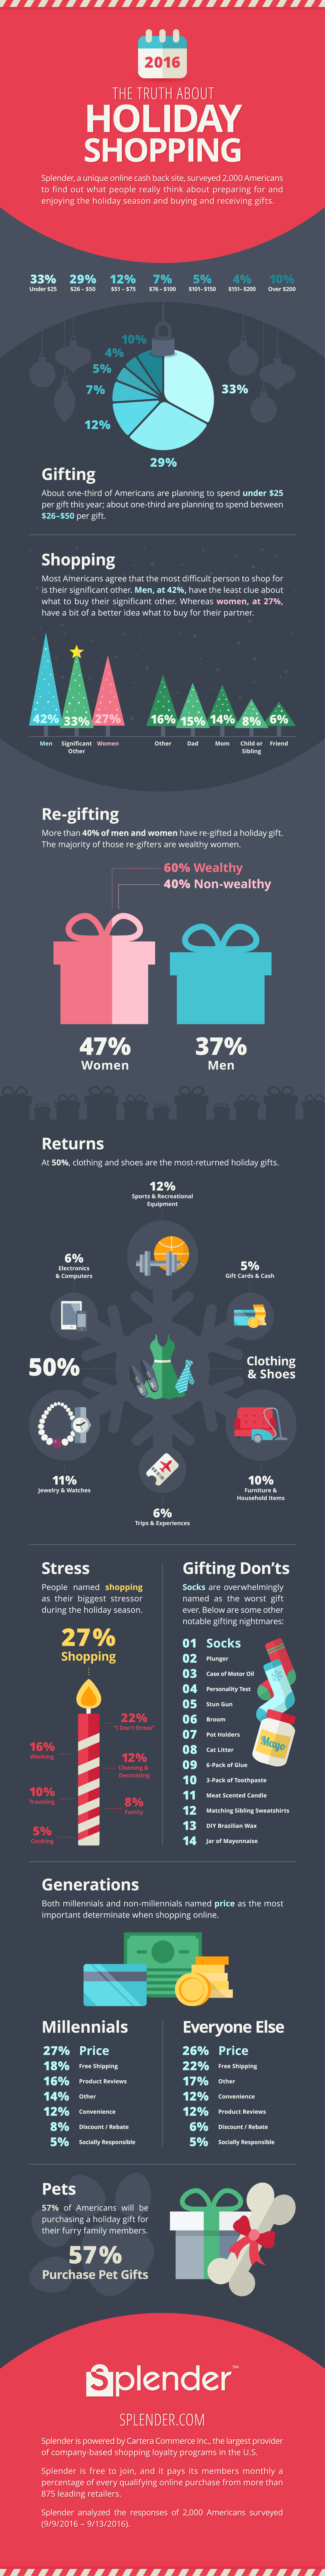 Splender's "The Truth About Holiday Shopping 2016" infographic